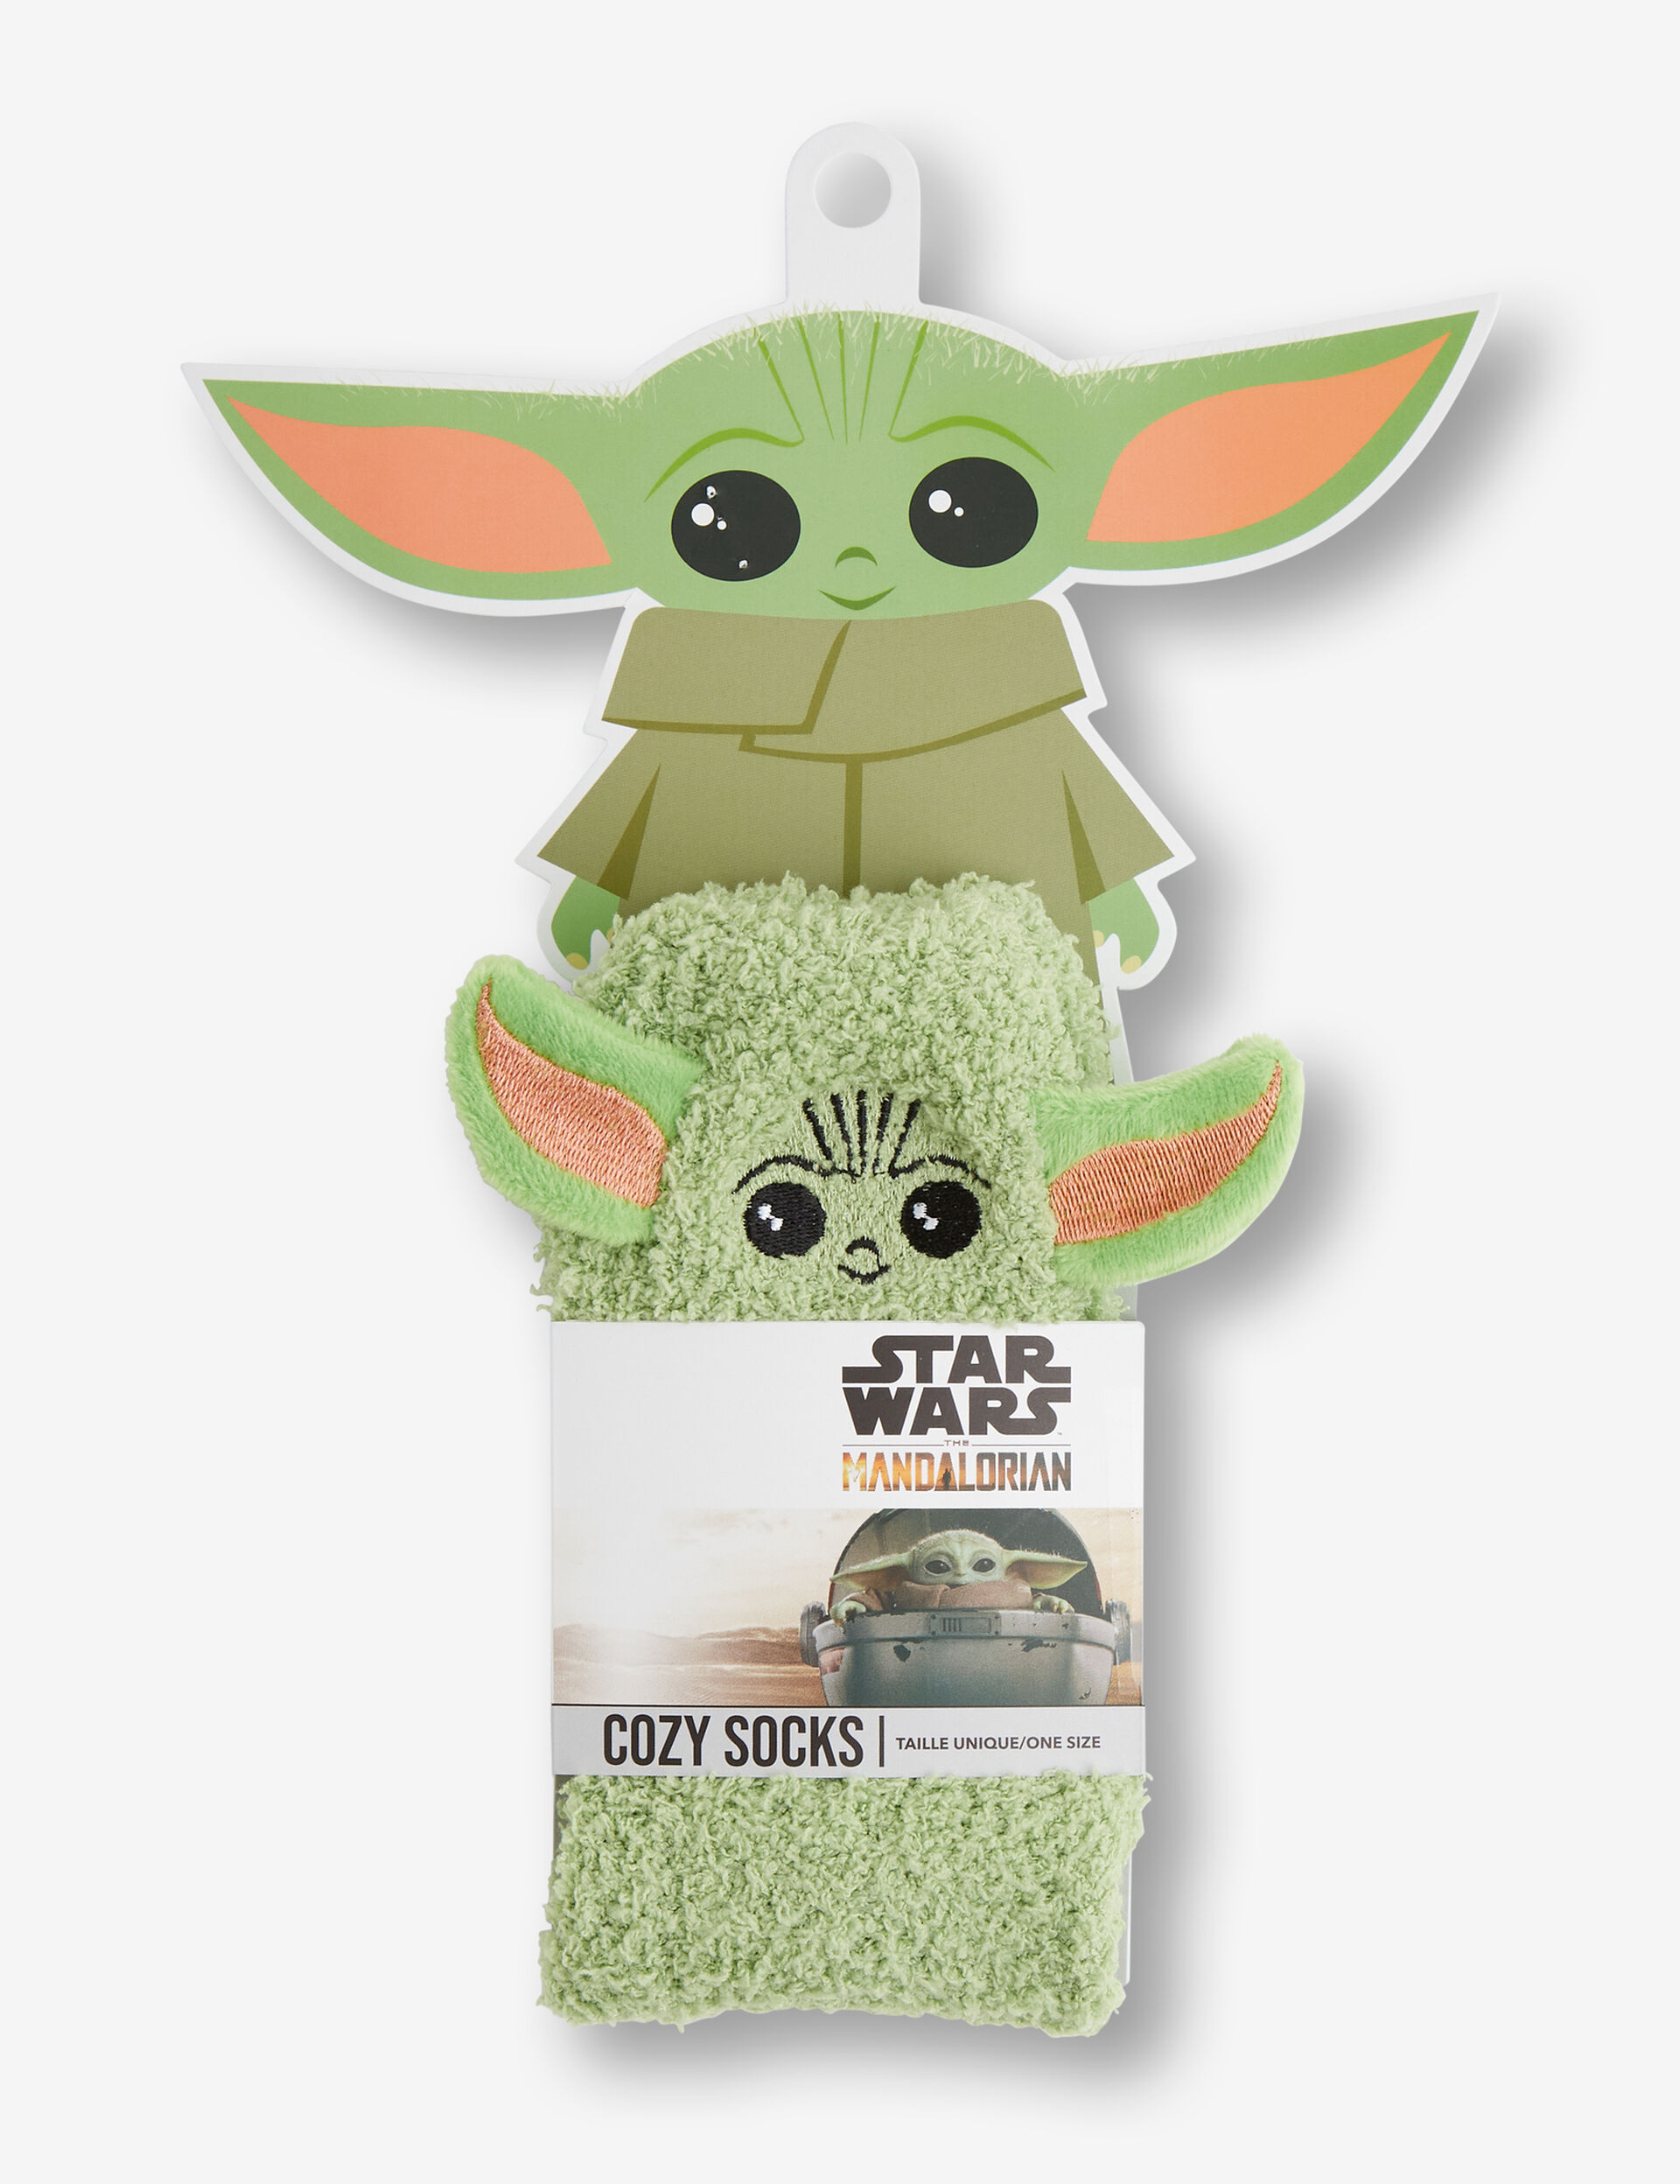 Chaussettes duveteuses Baby Yoda